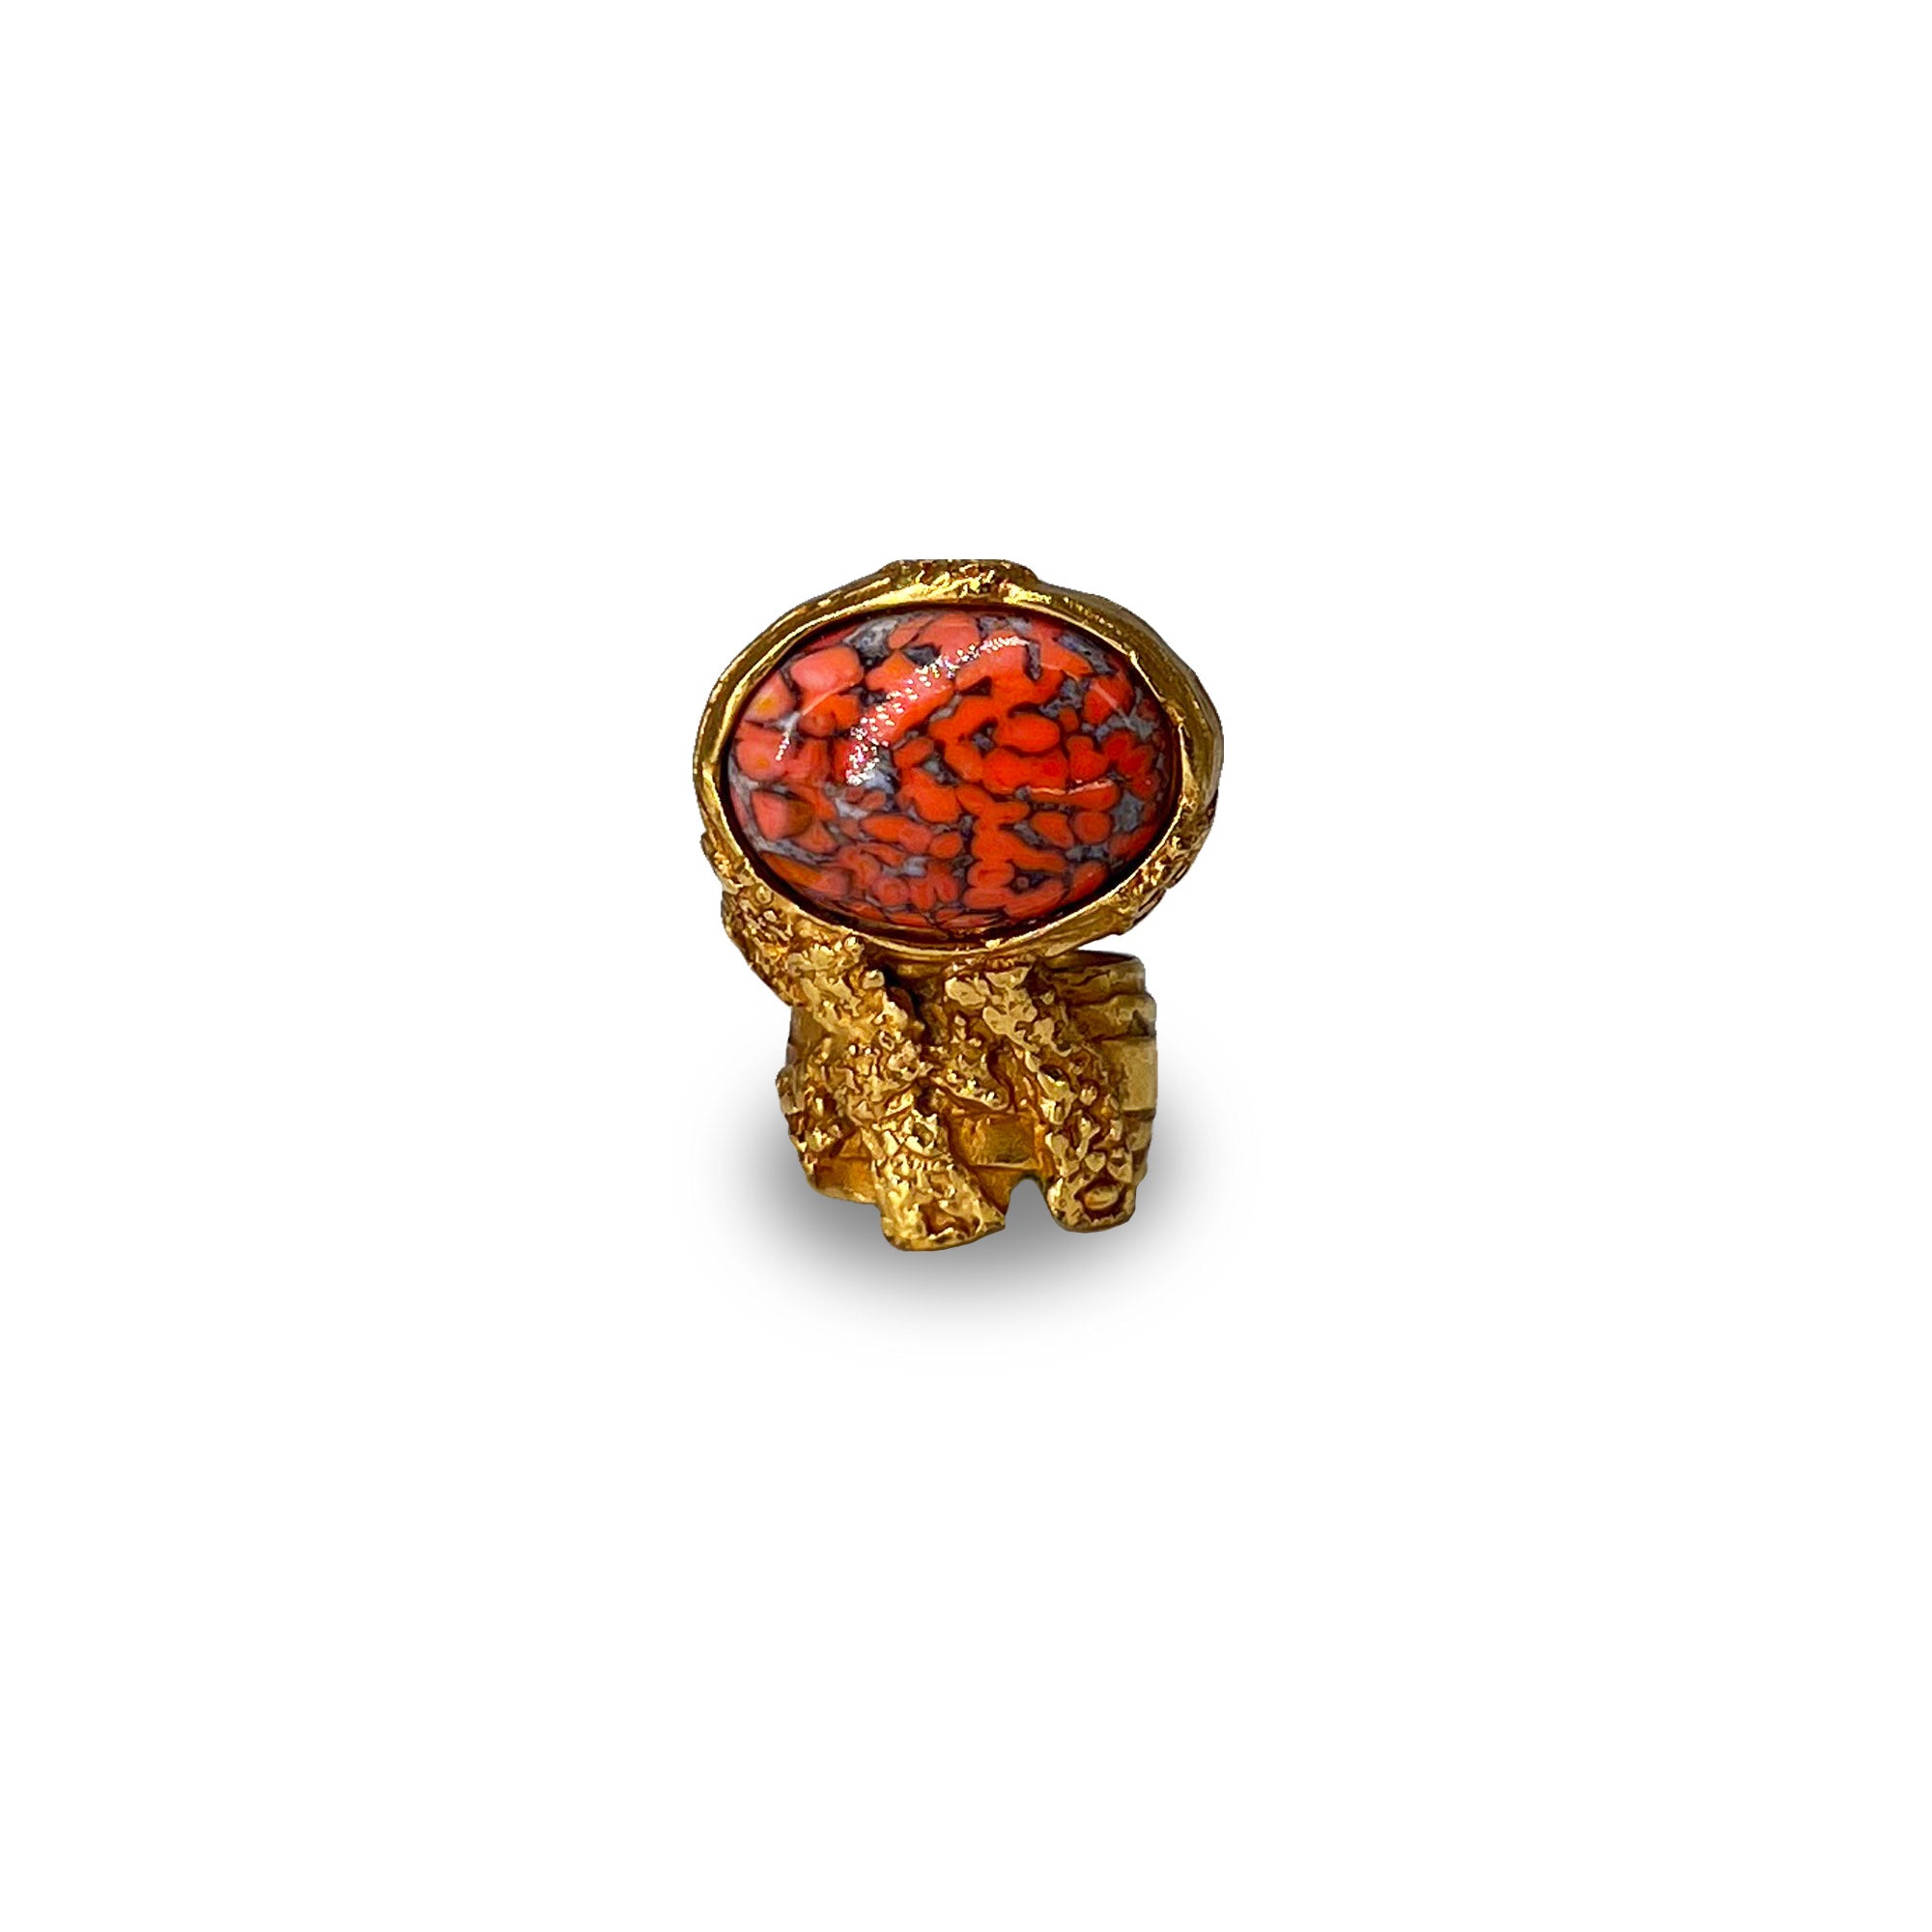 Yves Saint Laurent gold coral cabochon stone arty cocktail ring